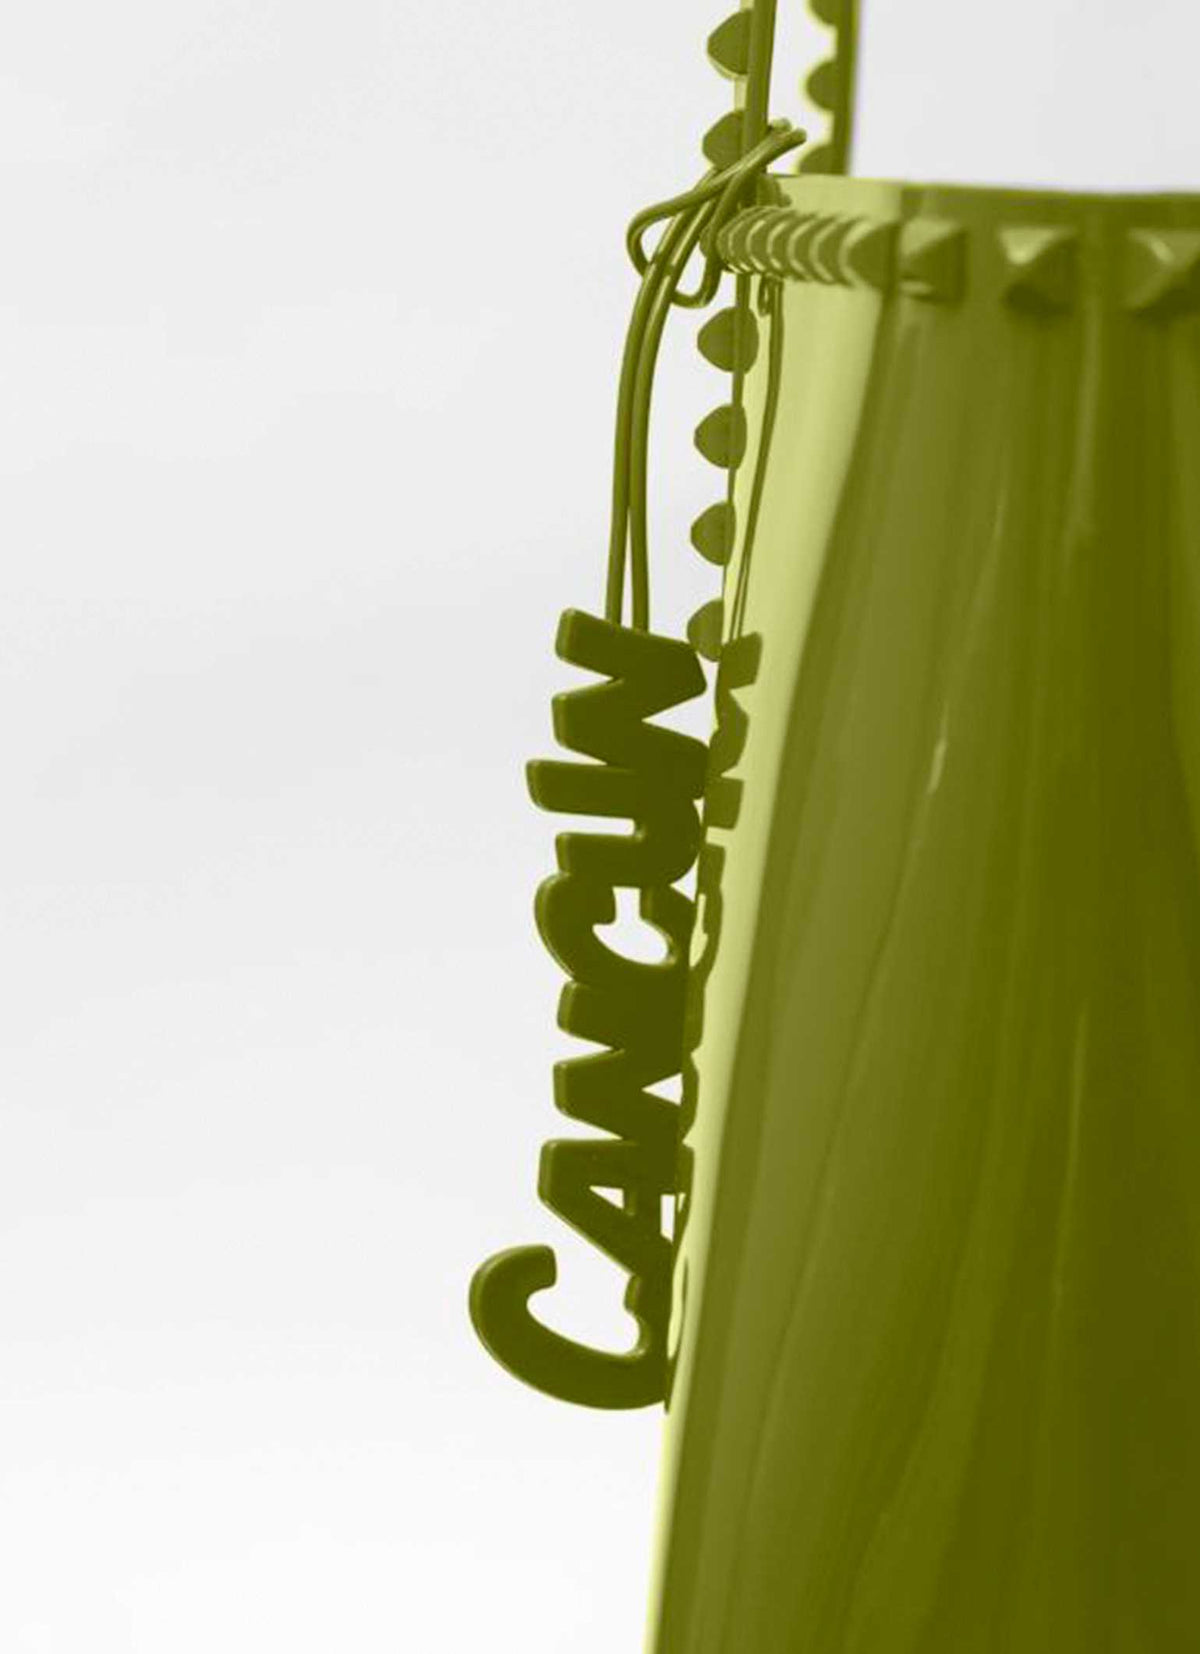 Olive green Cancun jelly charms for purses from Carmen Sol which are perfect for normal and jelly bags